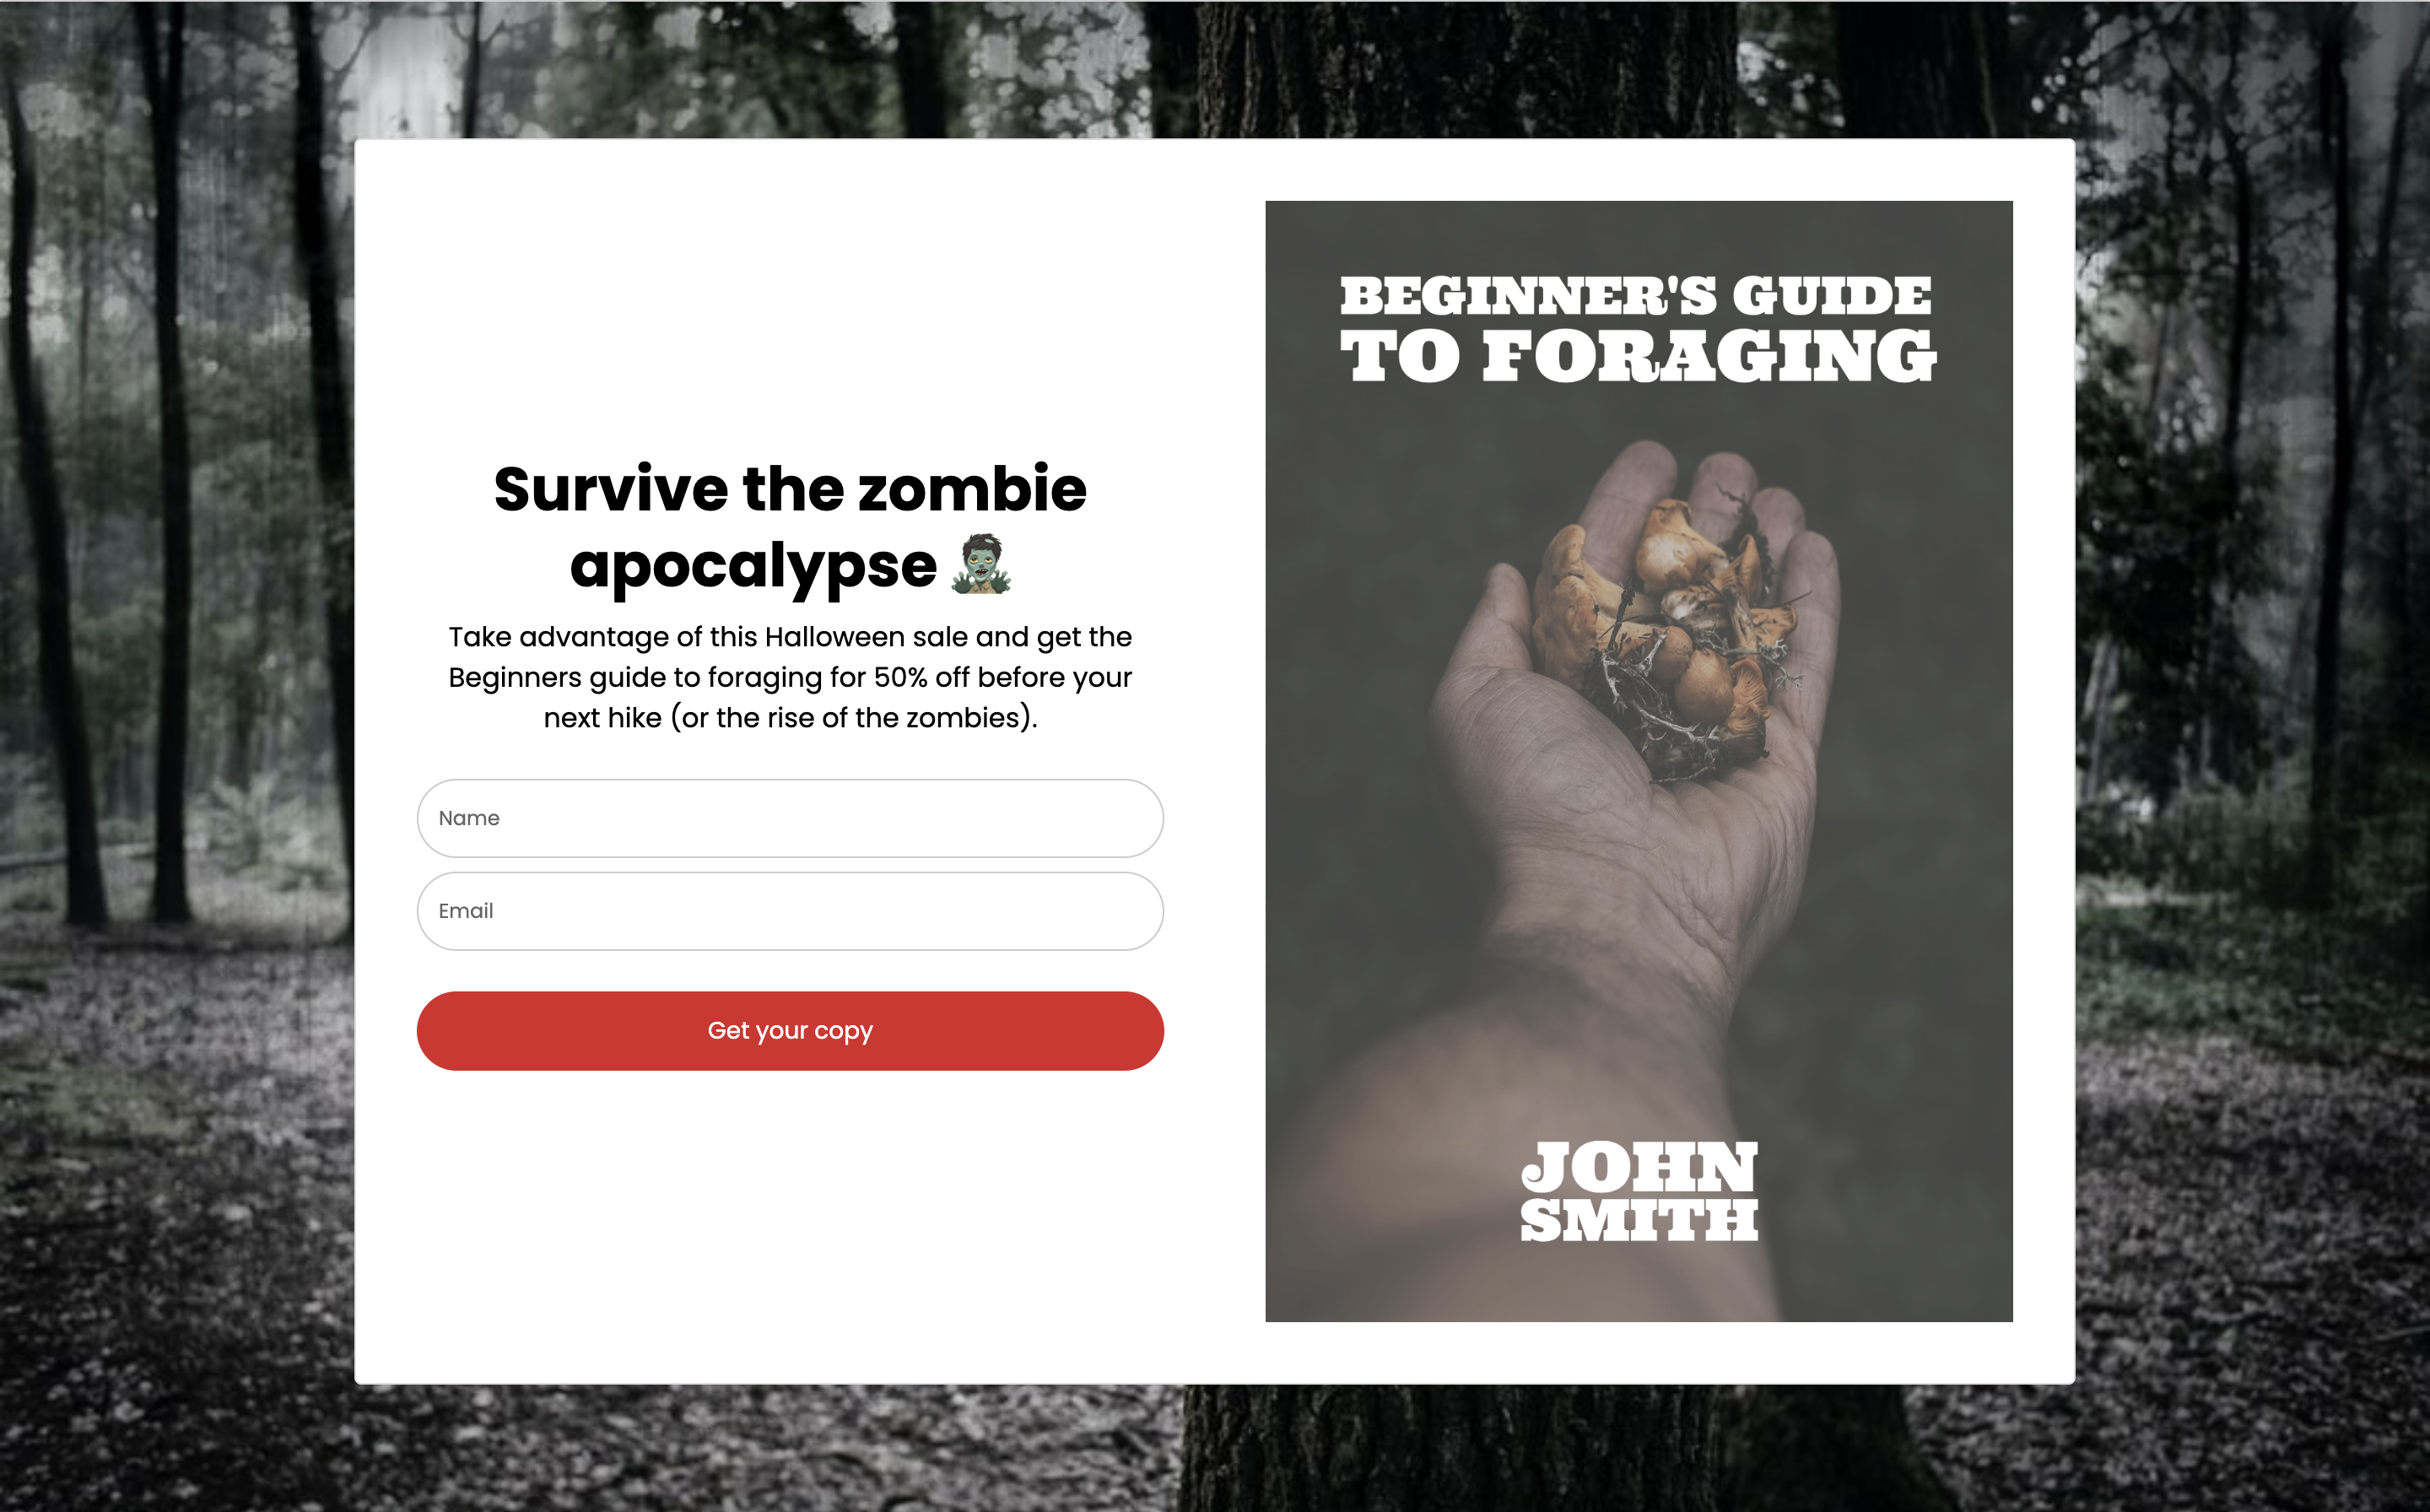 Halloween-themed landing page created in MailerLite